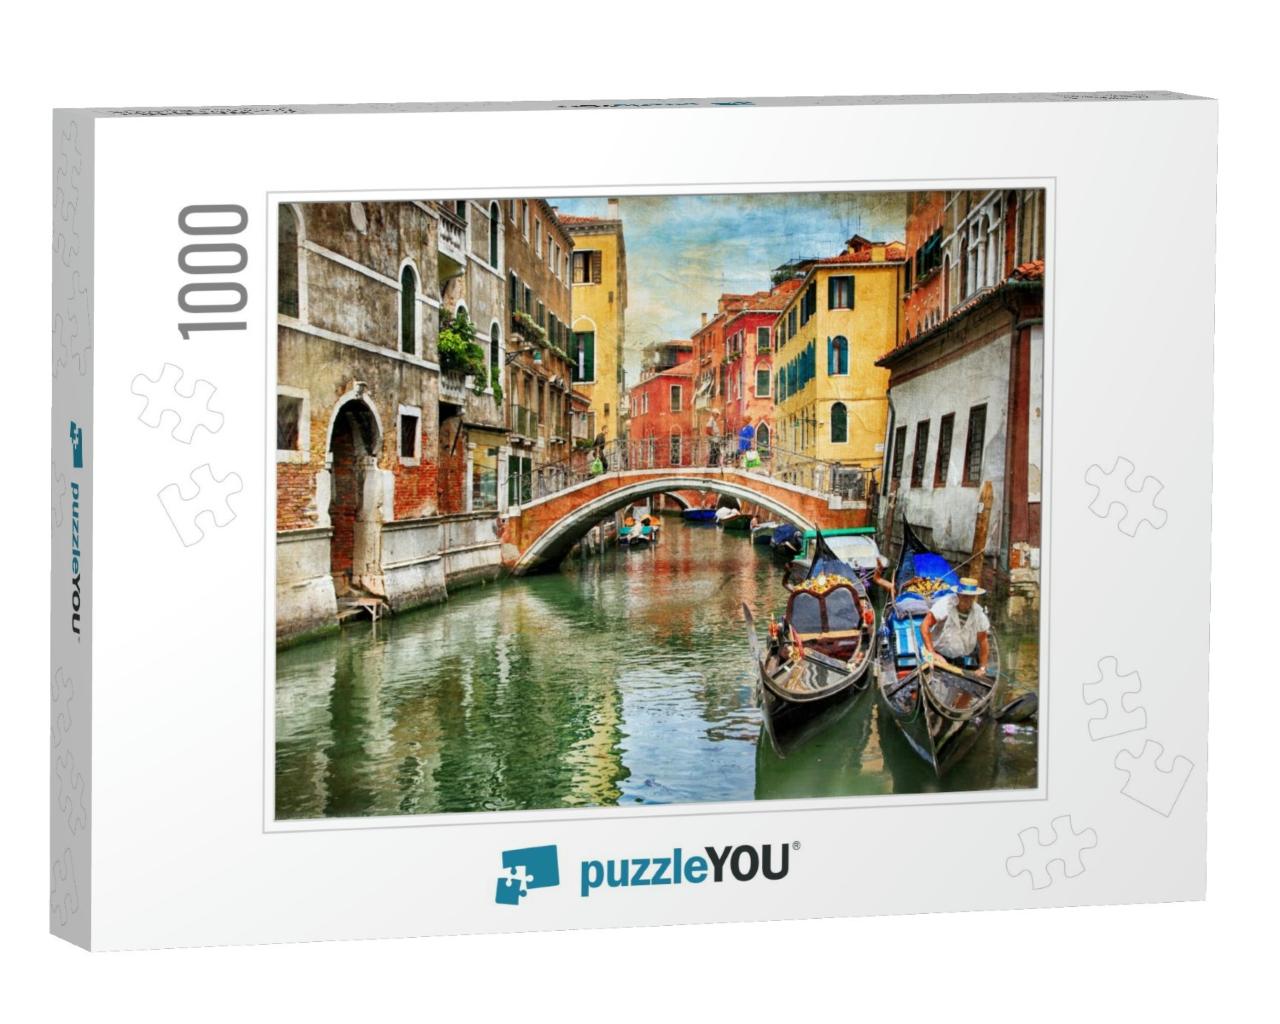 Romantic Venetian Canals - Artwork in Painting Style... Jigsaw Puzzle with 1000 pieces